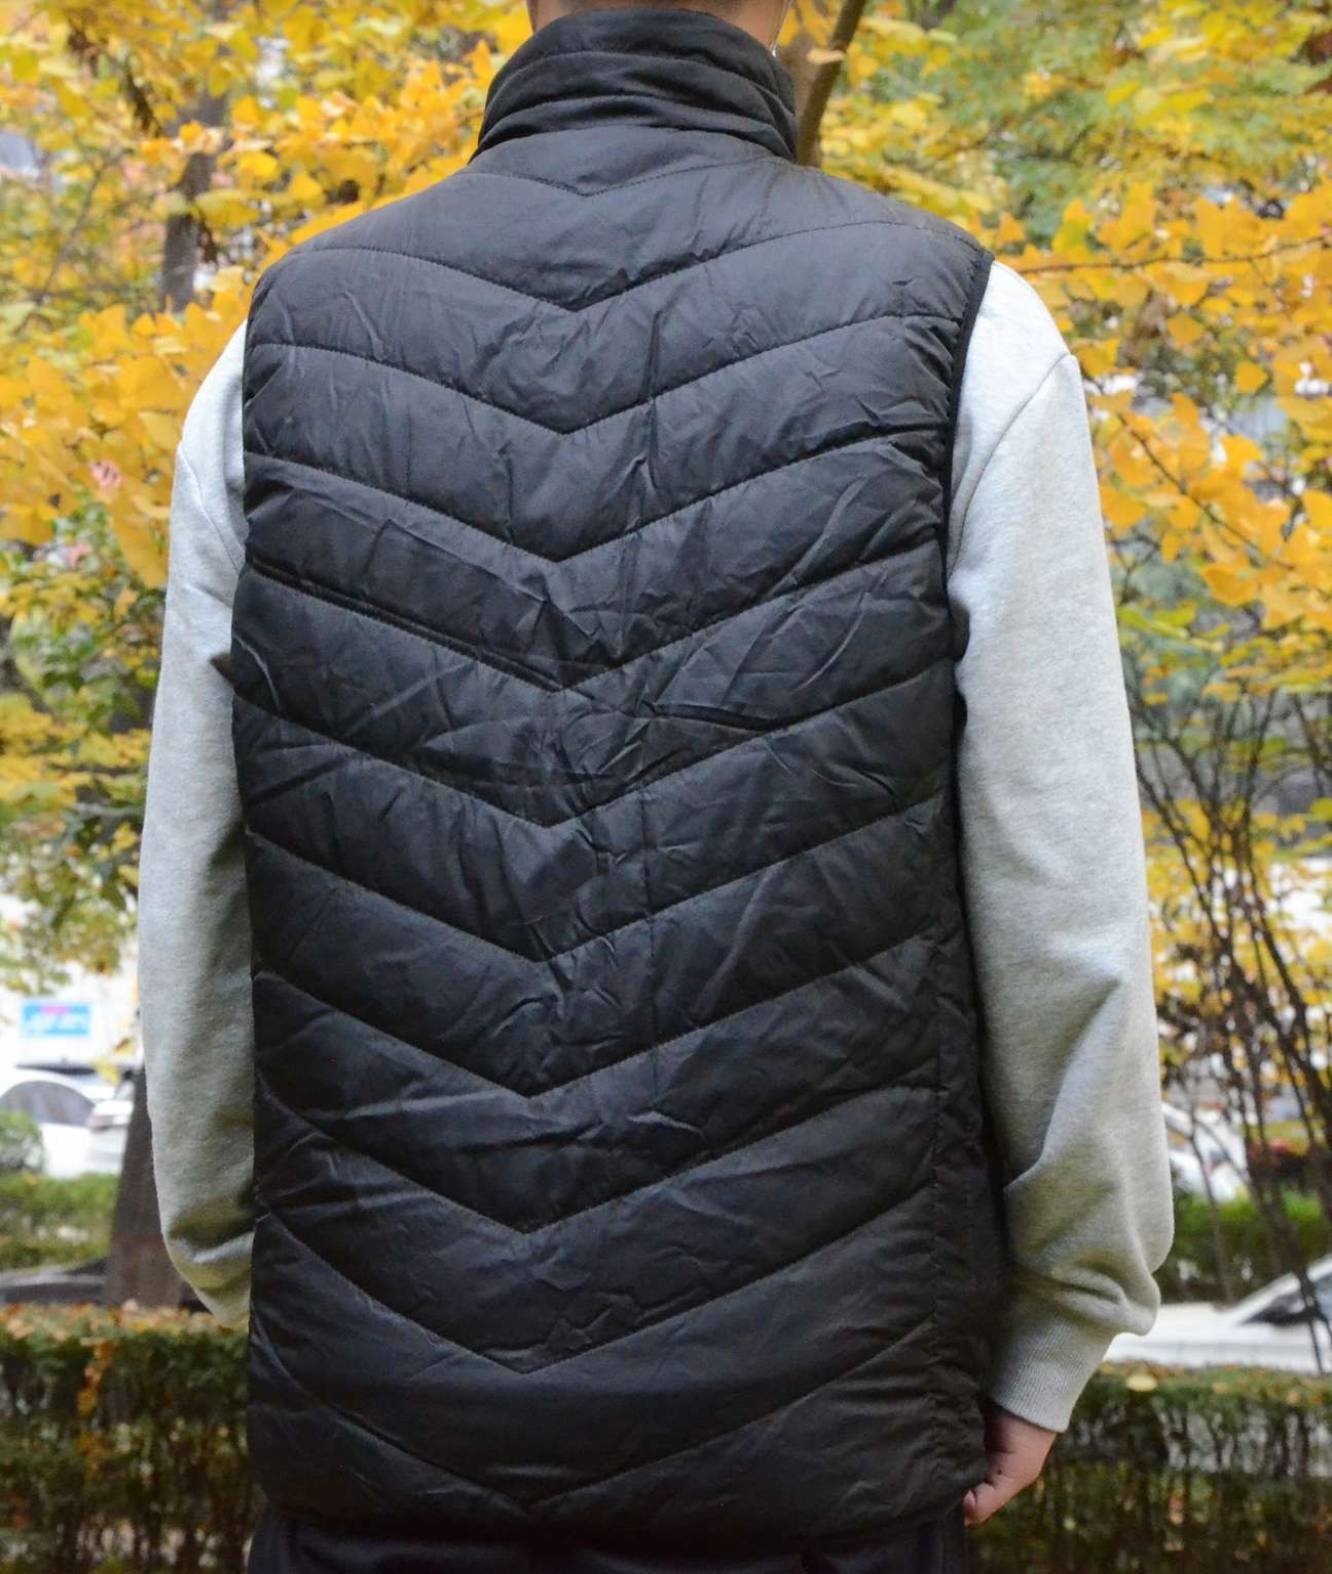 What Is The Best Brand Of Heated Vests